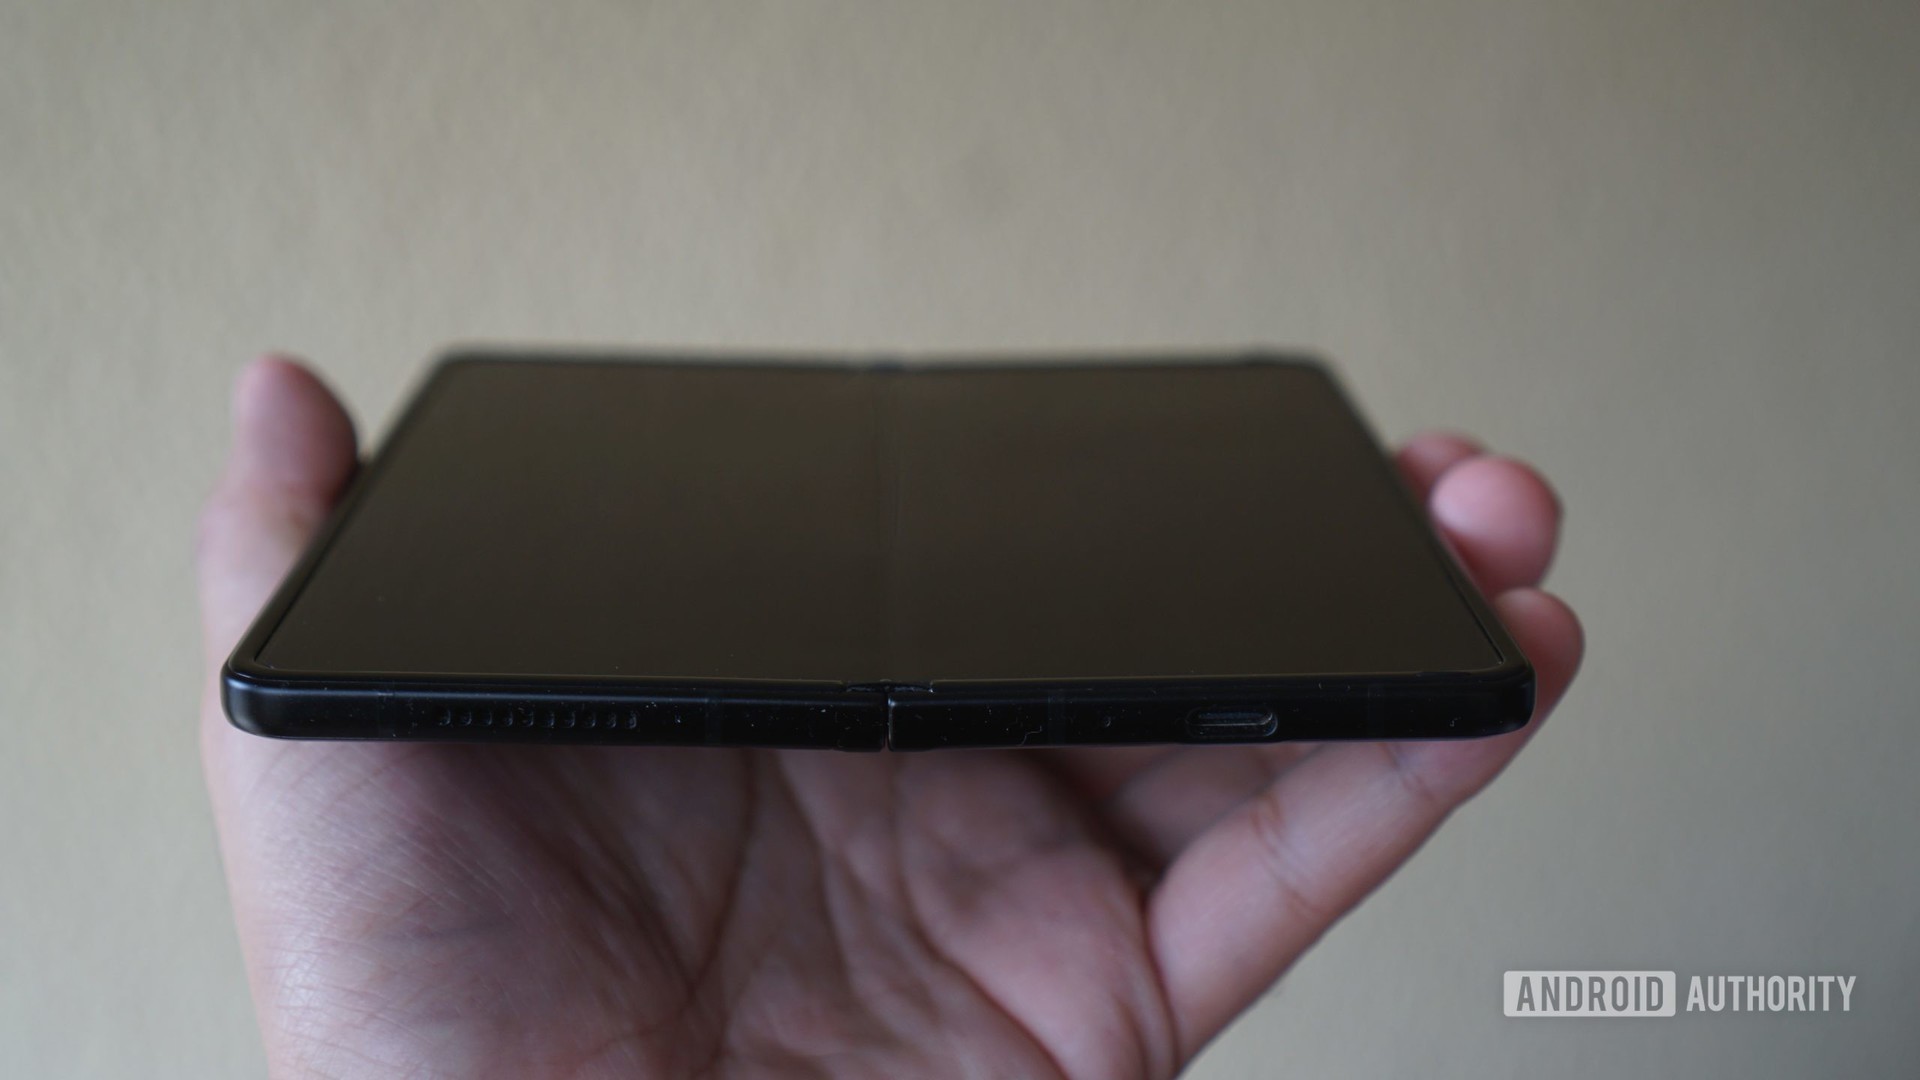 The Samsung Galaxy Z Fold 3 in its unfolded state.